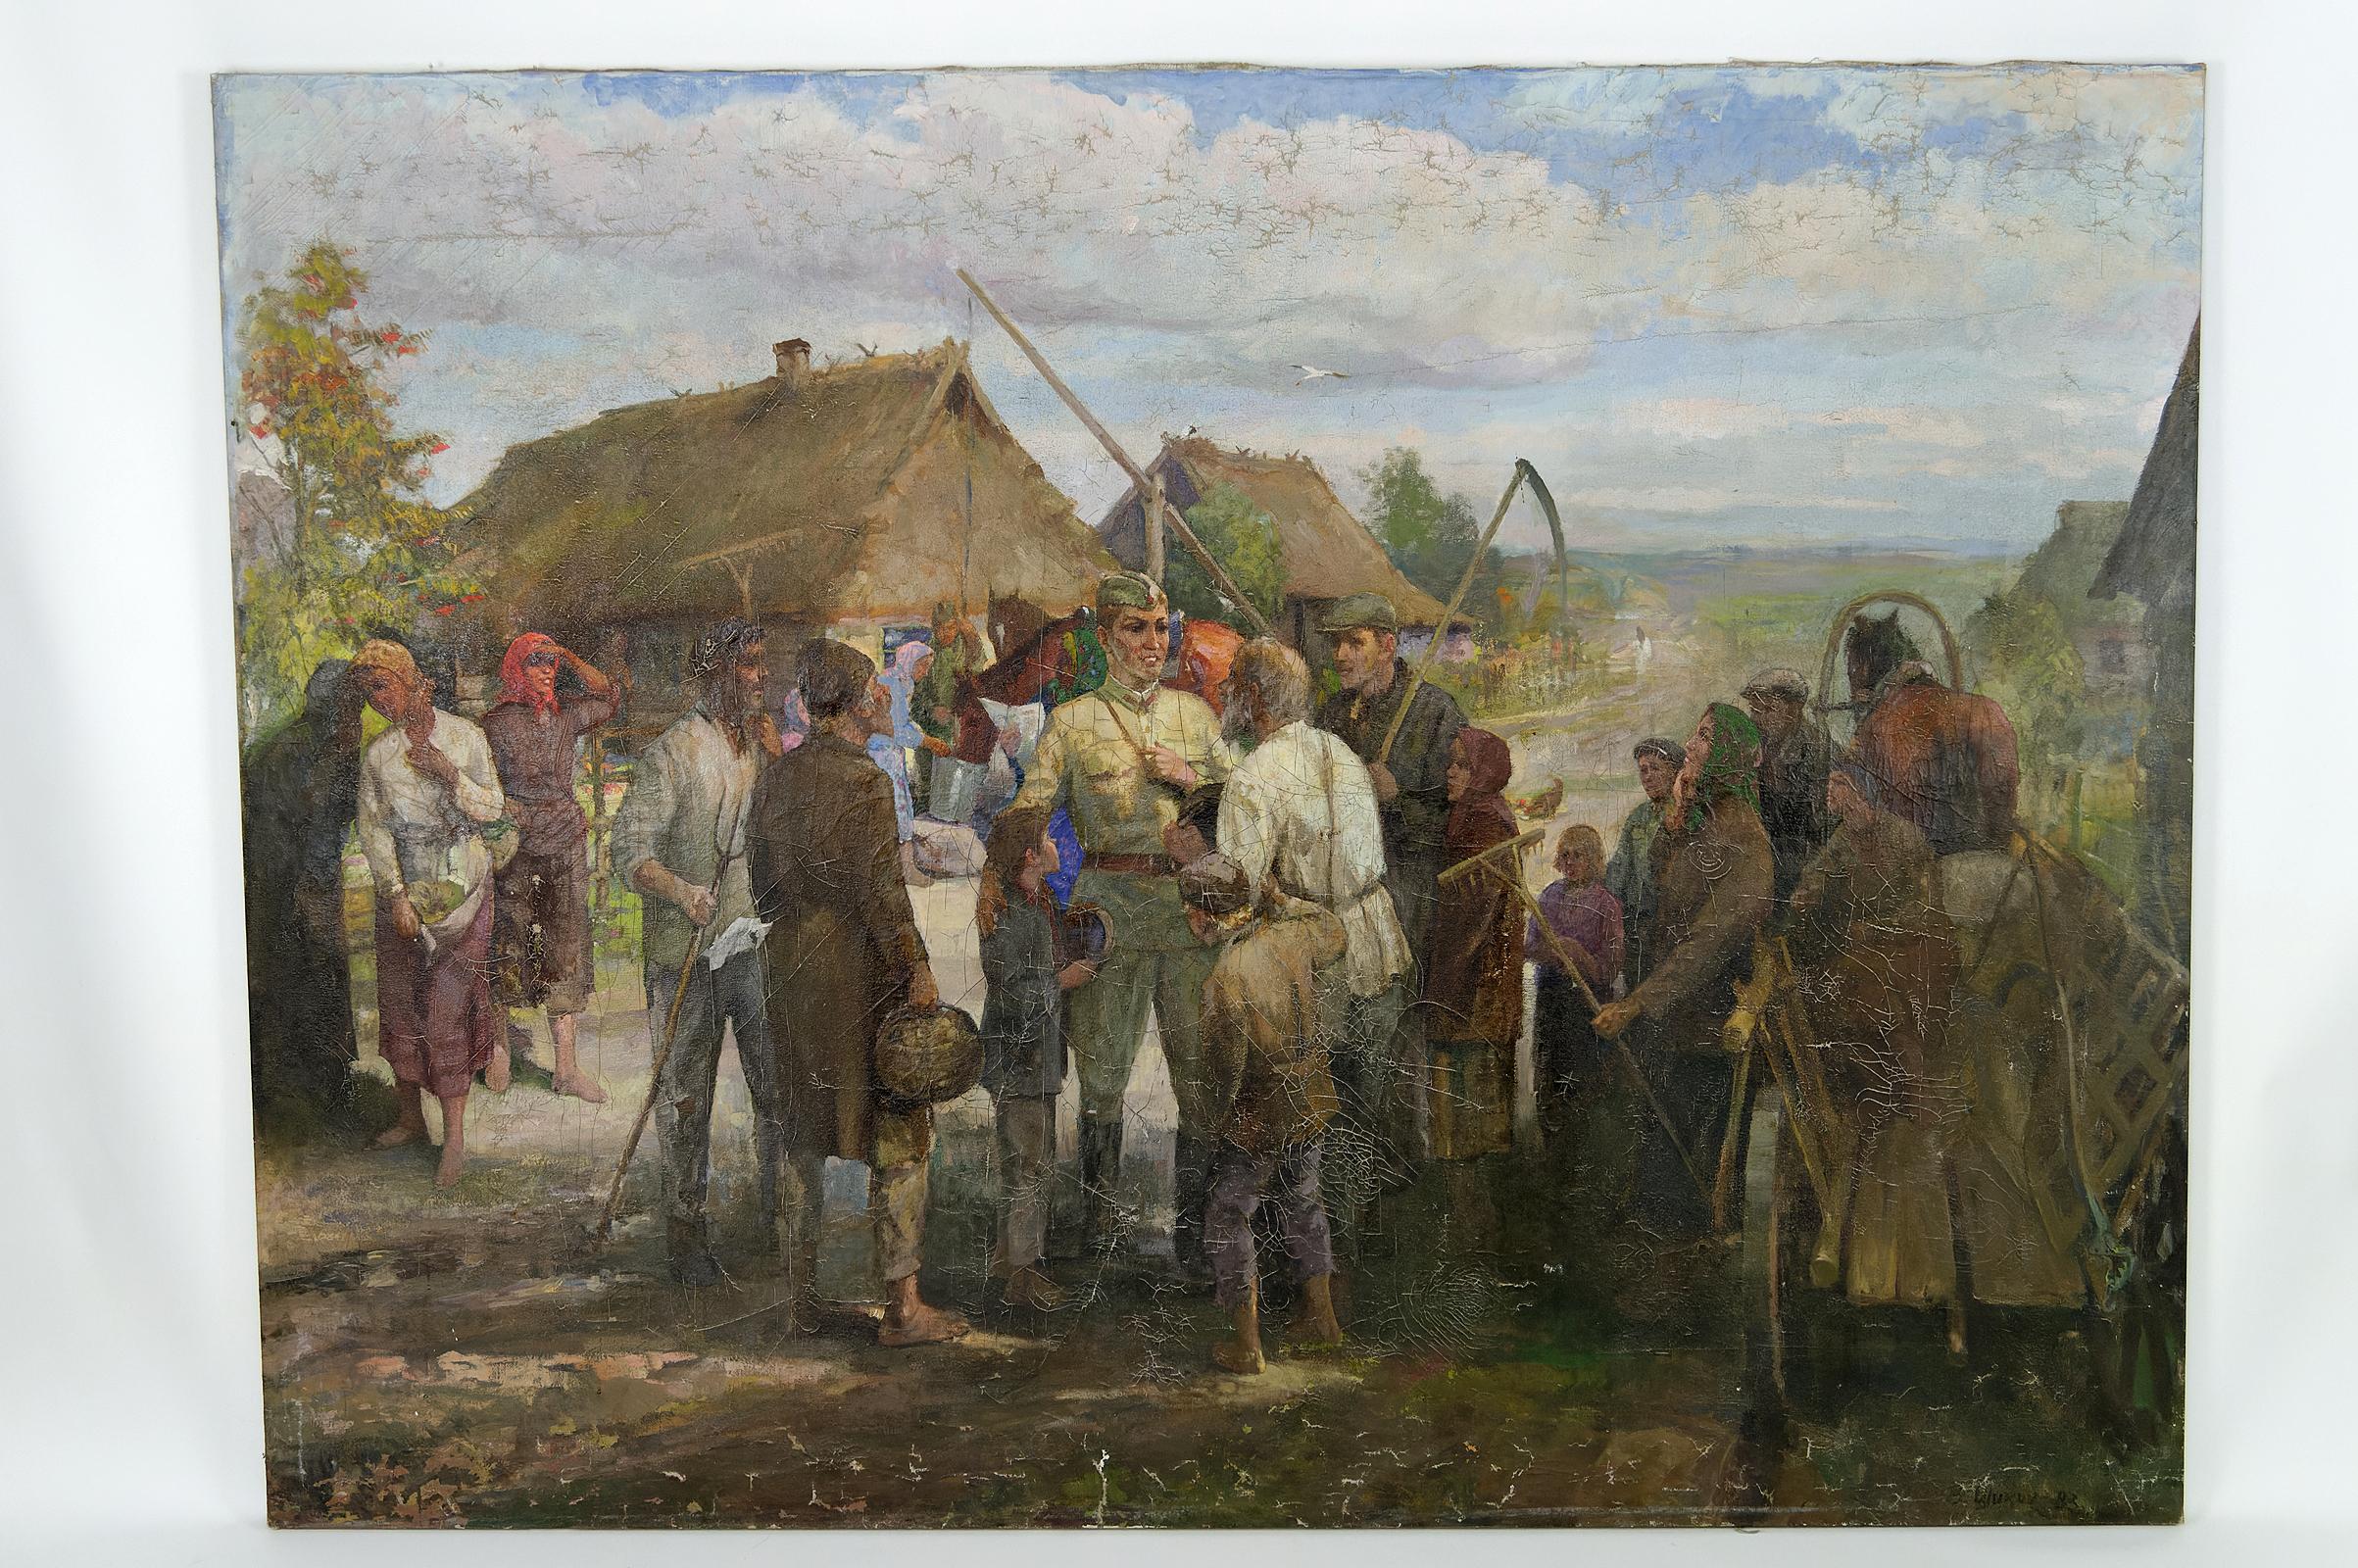 Soviet propaganda painting: celebration of the meeting of Red Army soldiers with peasants
Two Red Army scouts are warmly welcomed by a village of poor peasants, their horses are  water and they are considered heroes.

Surely a figurative propaganda